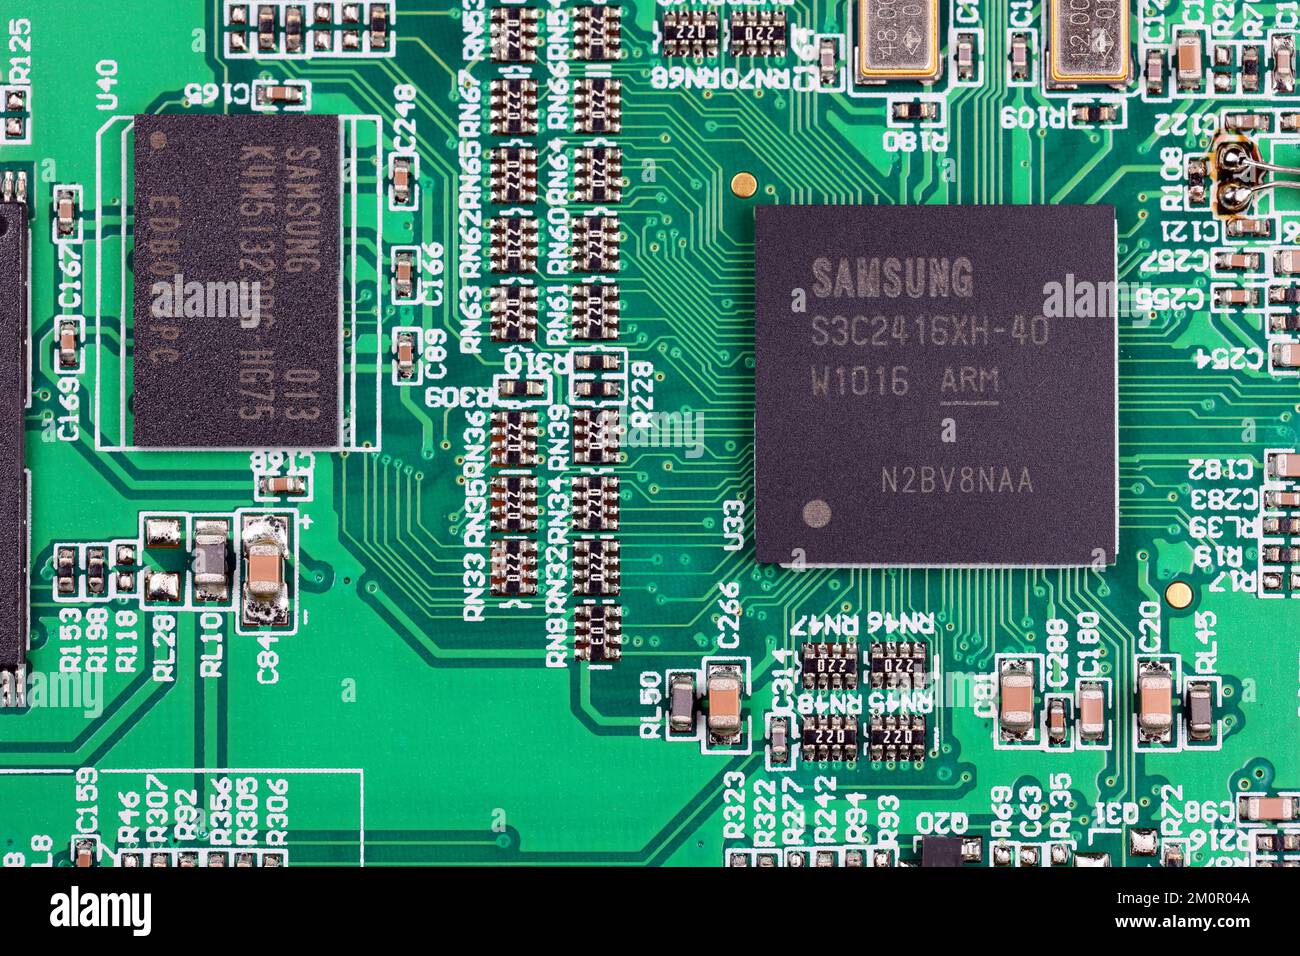 A Samsung Semiconductor RISC microcontroller and DRAM on an integrated circuit board controlling a handheld device. Stock Photo